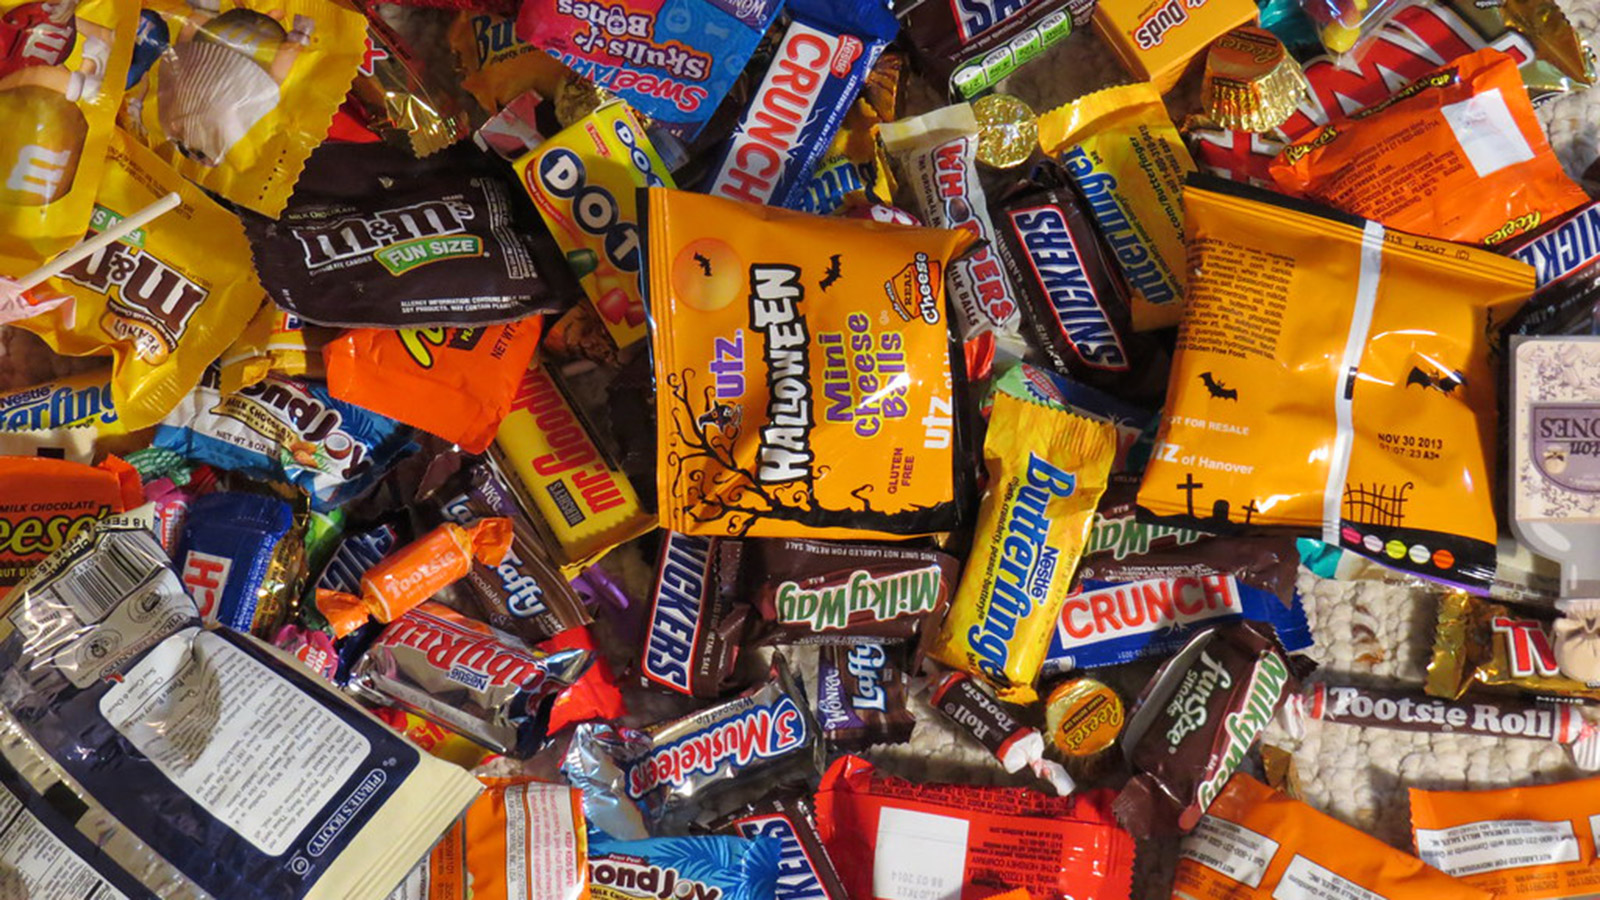 Halloween Hygiene: North Carolina dentist recommends chocolate over other candies this Halloween